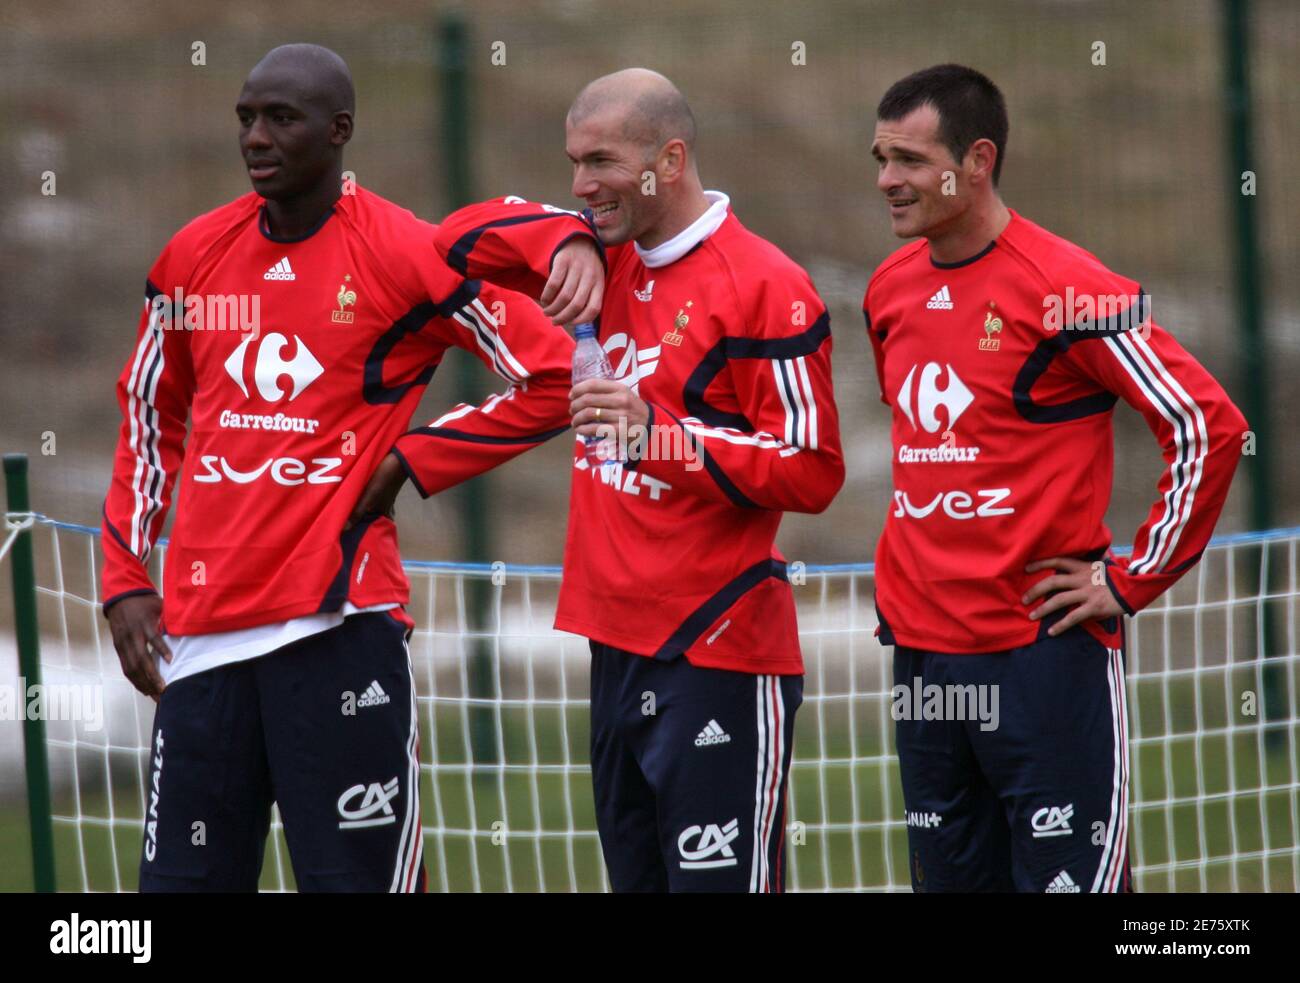 French soccer star Zinedine Zidane (C) is flanked by teammates Willy Sagnol  (R) and Alou Diarra during a training session at Tignes in French Alps, May  23, 2006. [The 23-man French squad